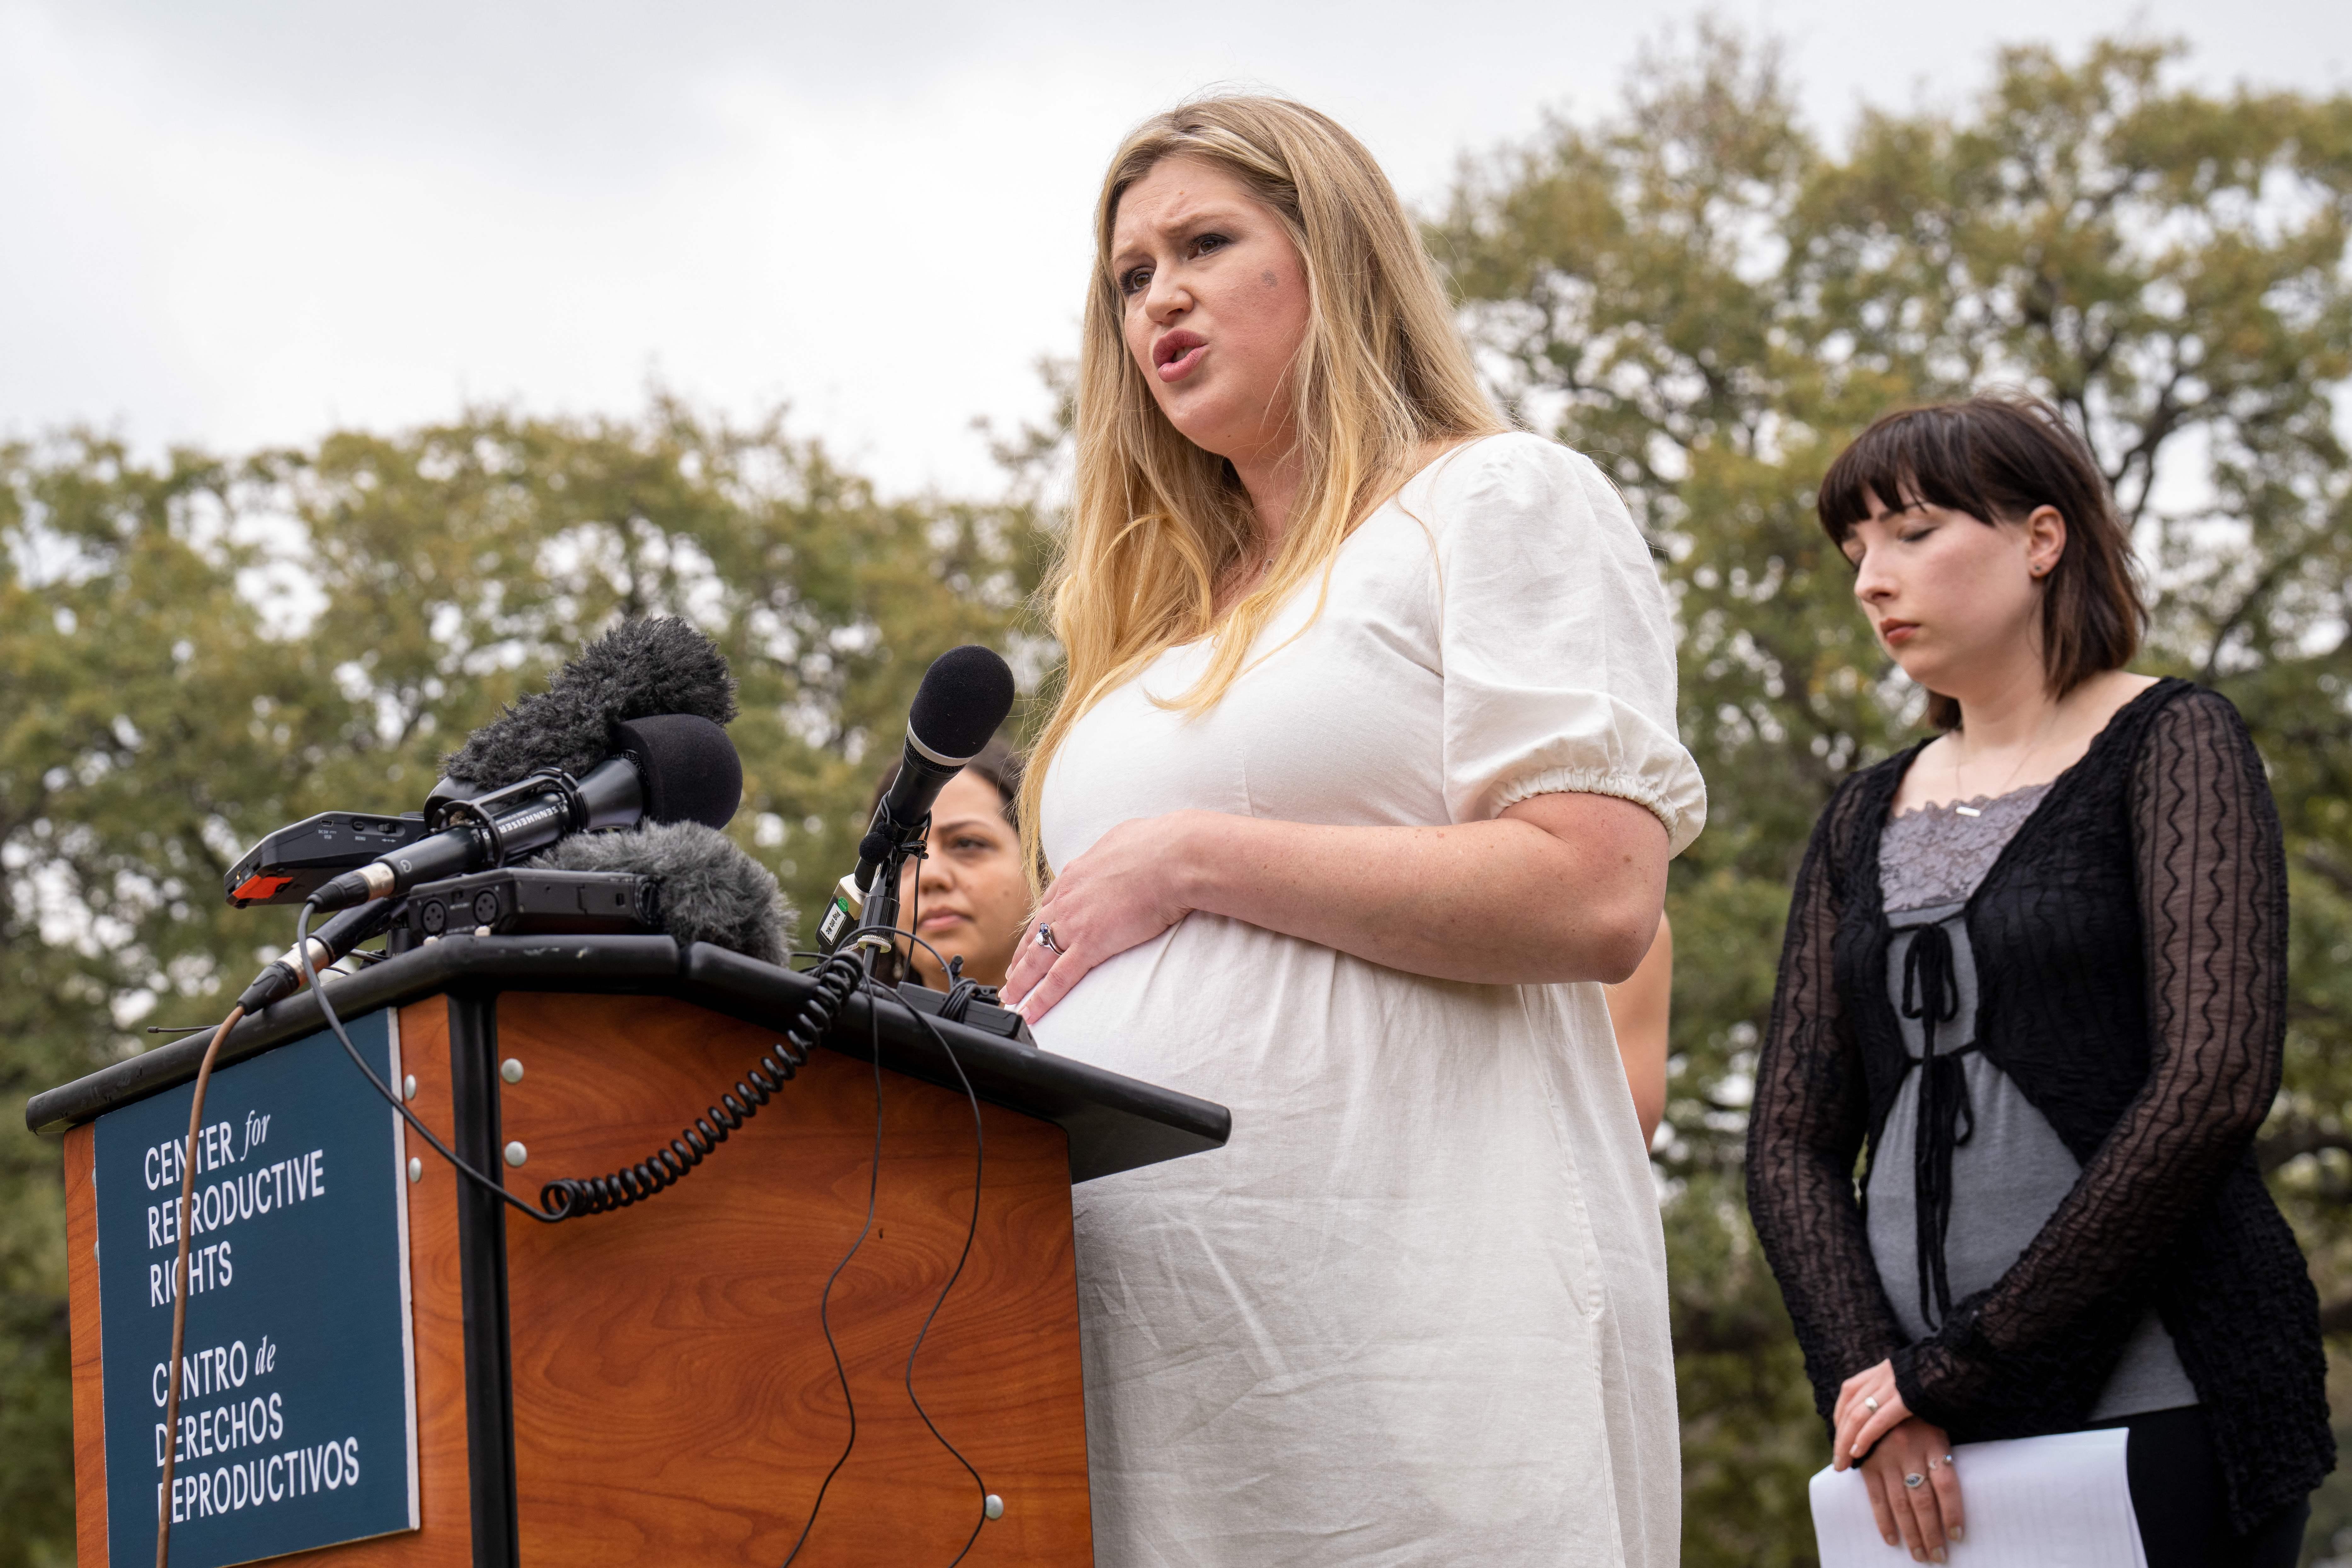 A visibly pregnant woman in all white speaks at a podium as another plaintiff stands behind her and looks down, appearing resigned, while holding a piece of paper.